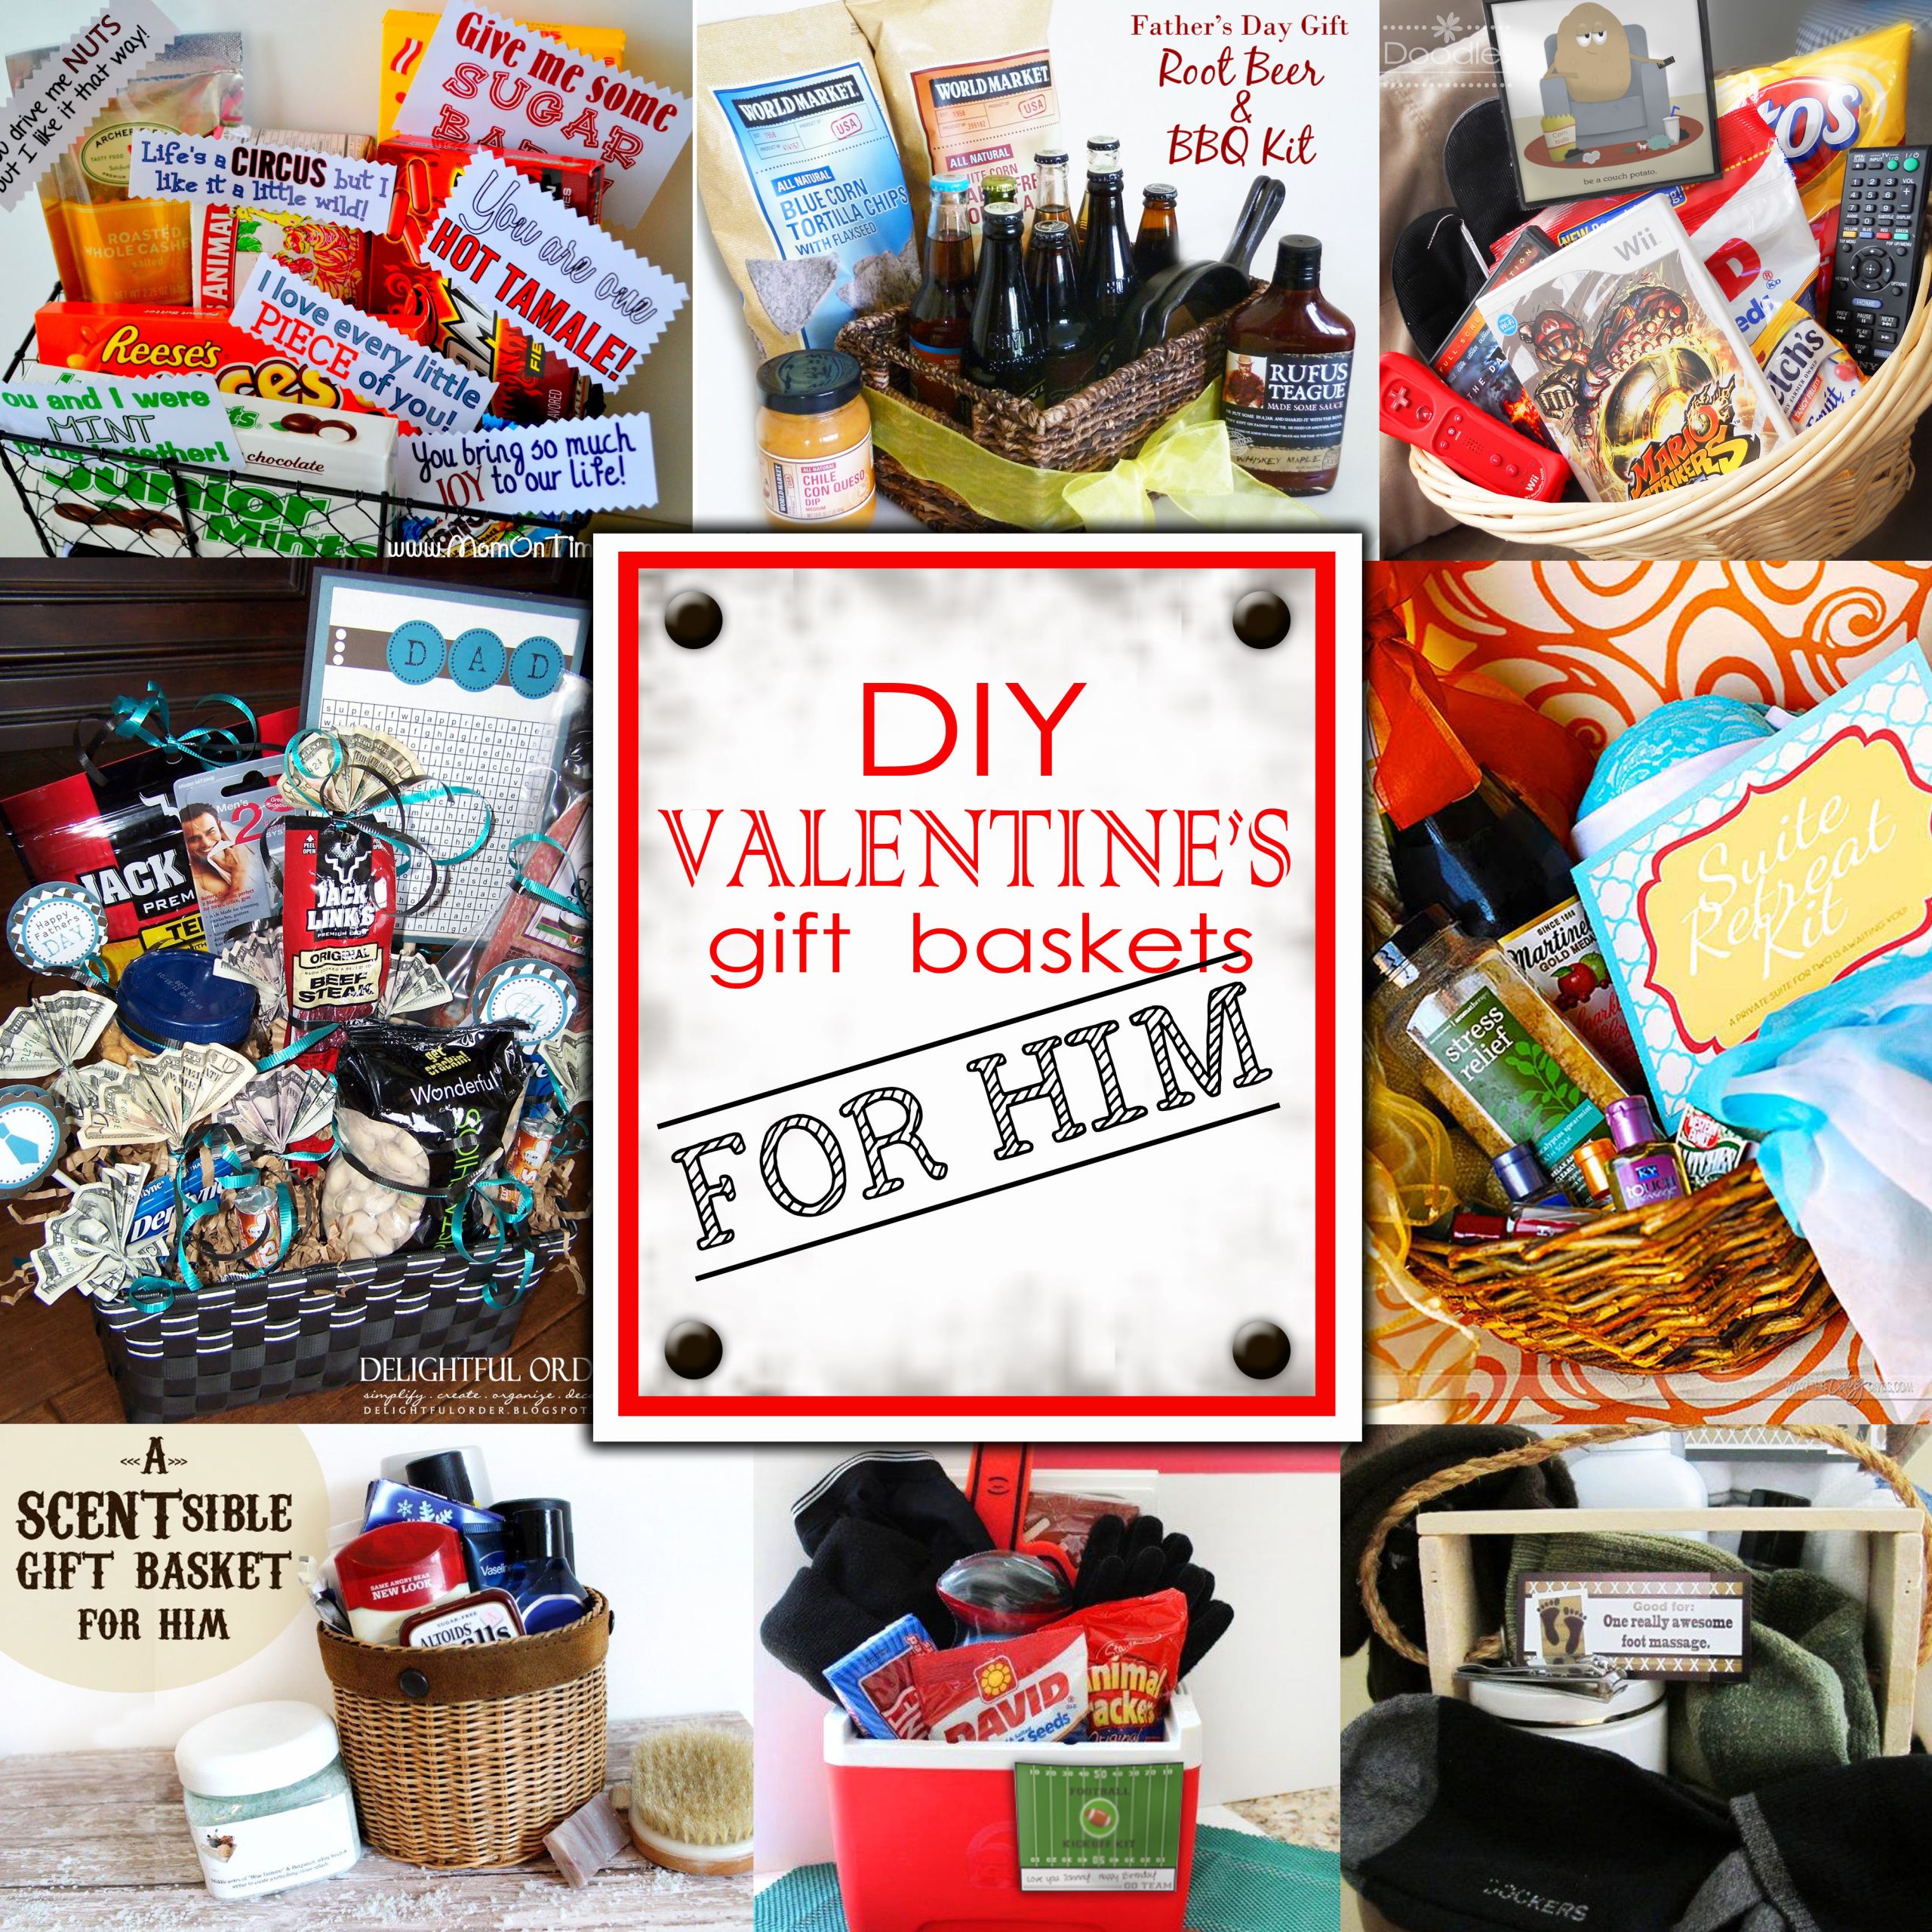 Valentine Day Gift Ideas for Him Diy Awesome Diy Valentine S Day Gift Baskets for Him Darling Doodles